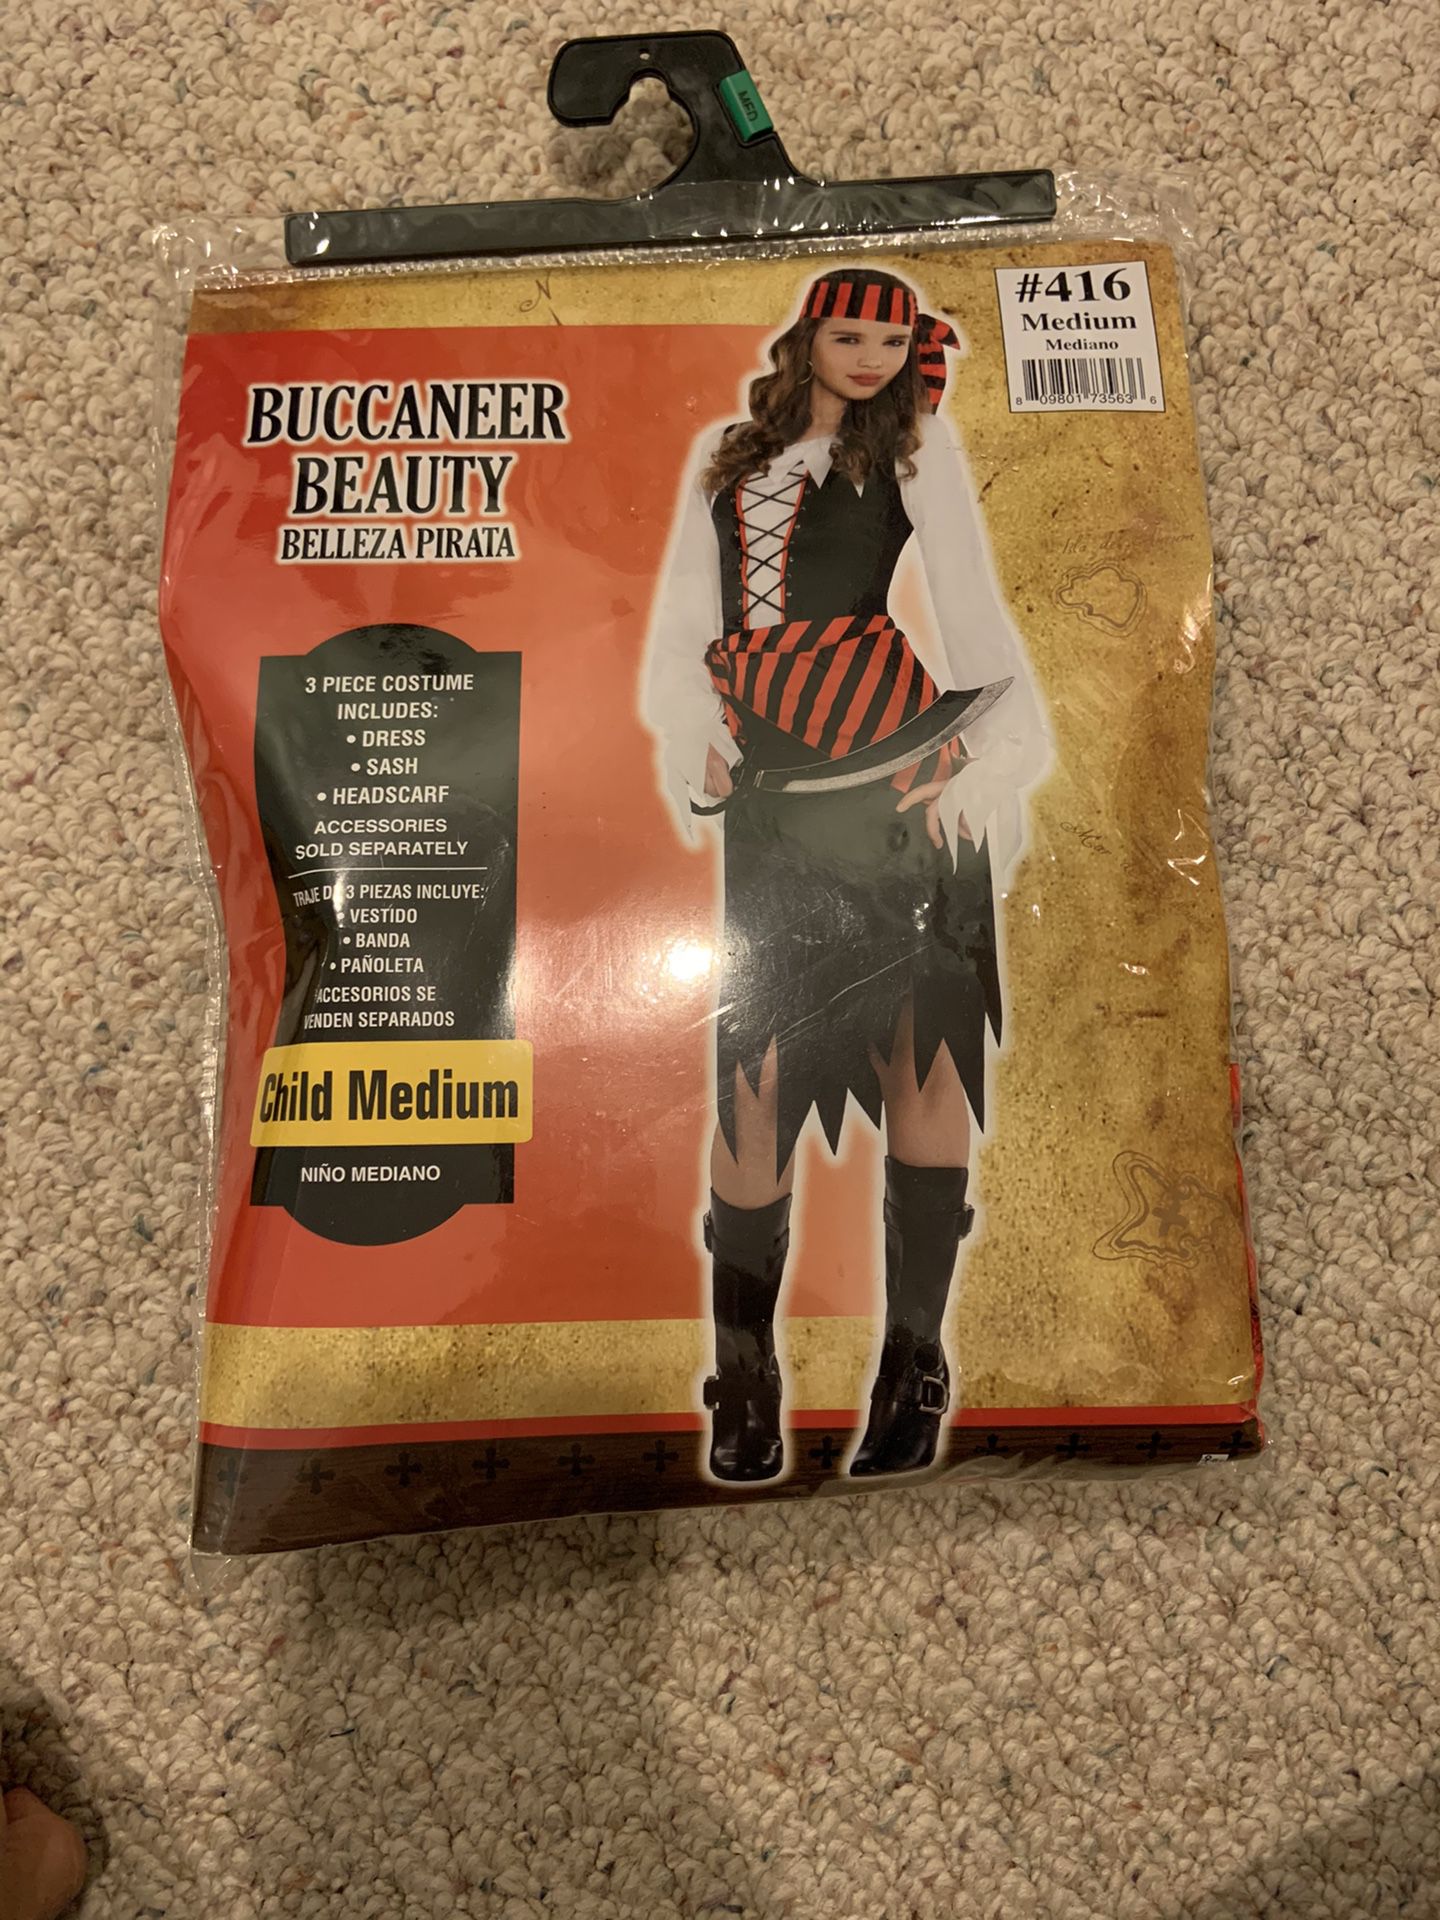 Pirate costume for girls